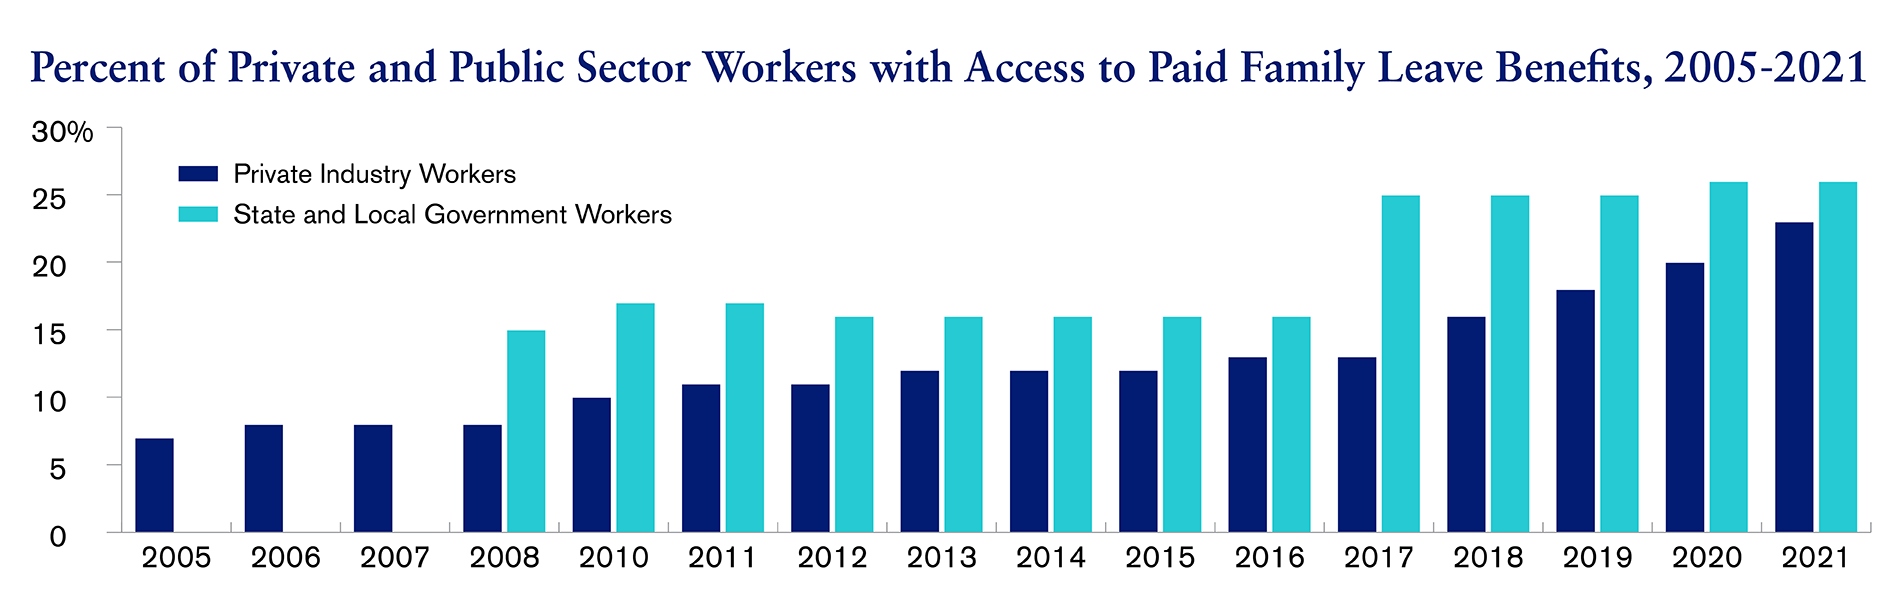 Perent of Private and Public Sector Workers with Access to Paid Family Leave Benefits 2005-2021